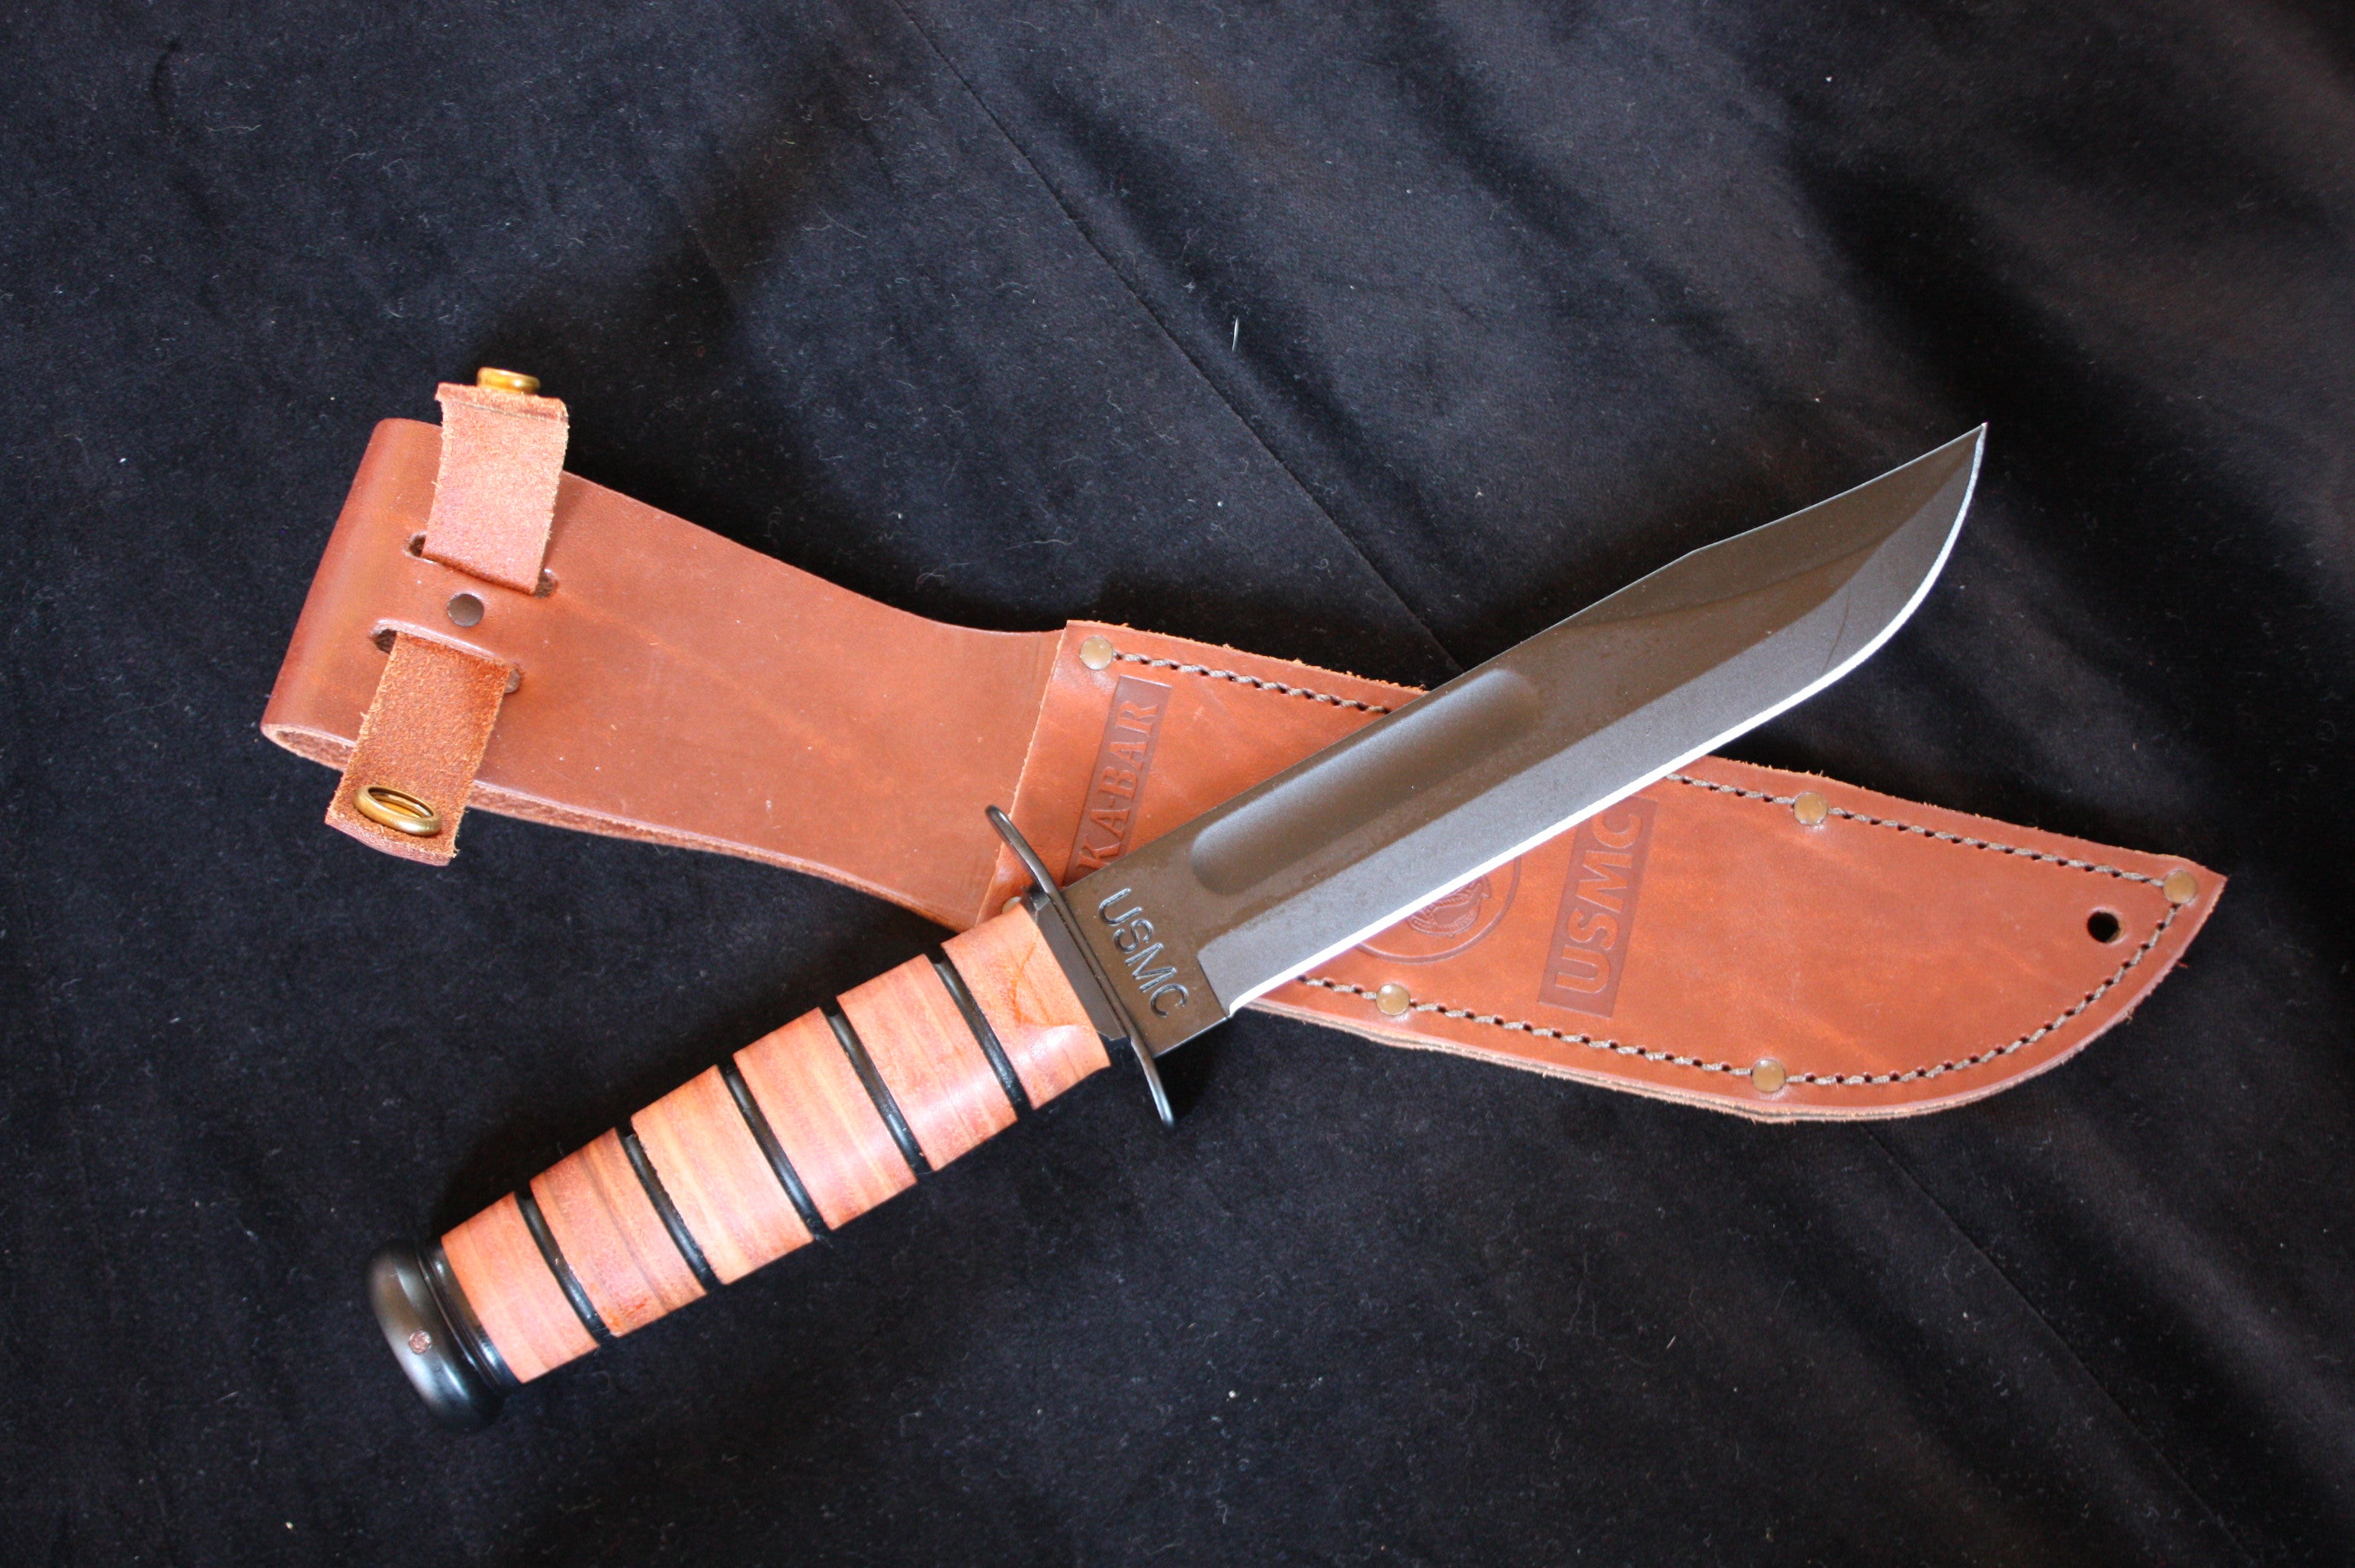 A Ka-Bar USMC knife. Investigators appear to be looking for a knife of this kind